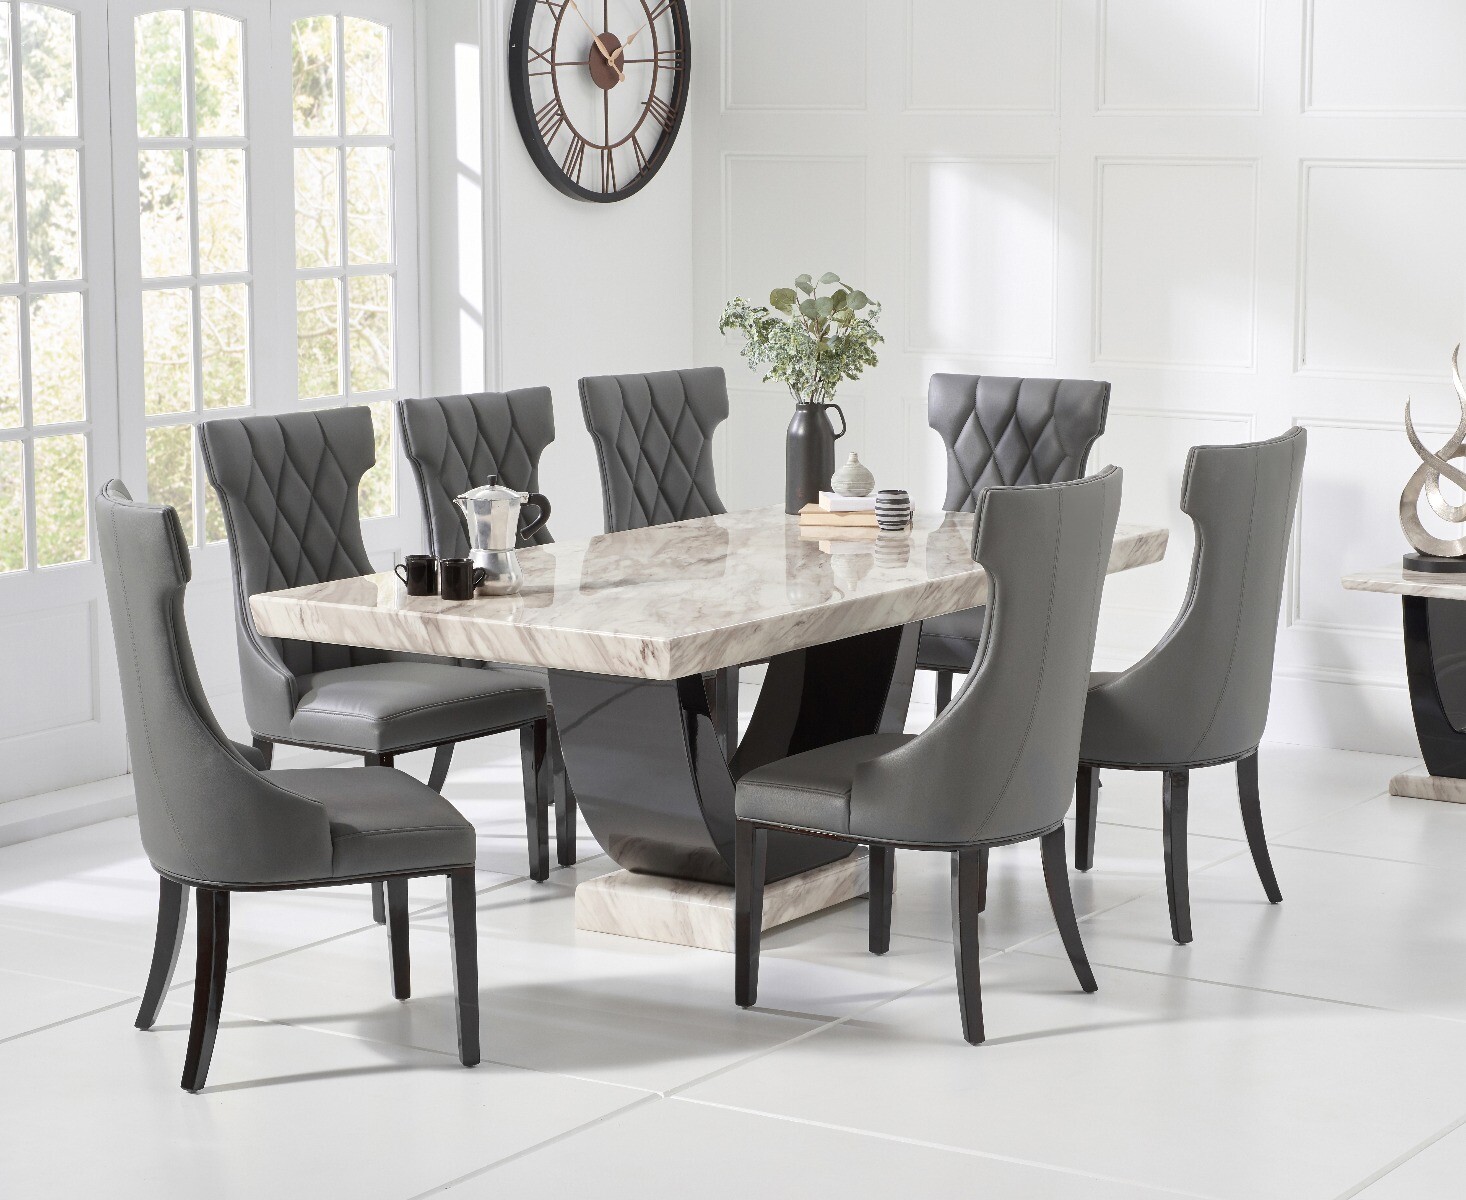 Novara 200cm Cream And Black Pedestal Marble Dining Table With 8 Grey Sophia Chairs